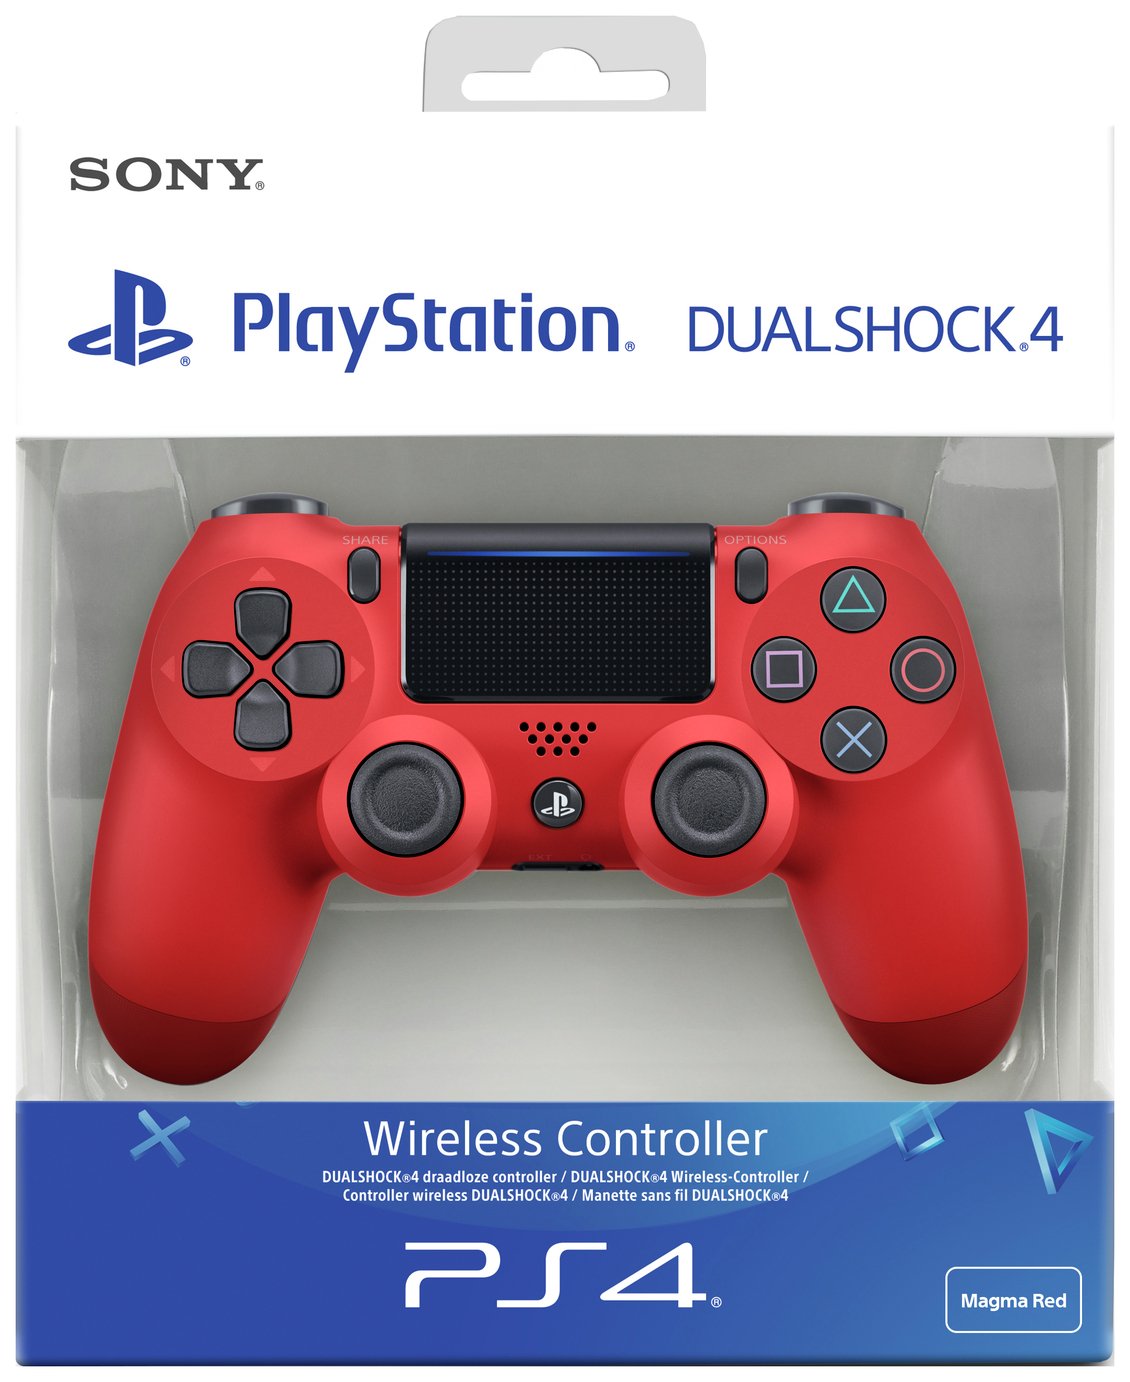 Sony PS4 DualShock 4 V2 Wireless Controller Review